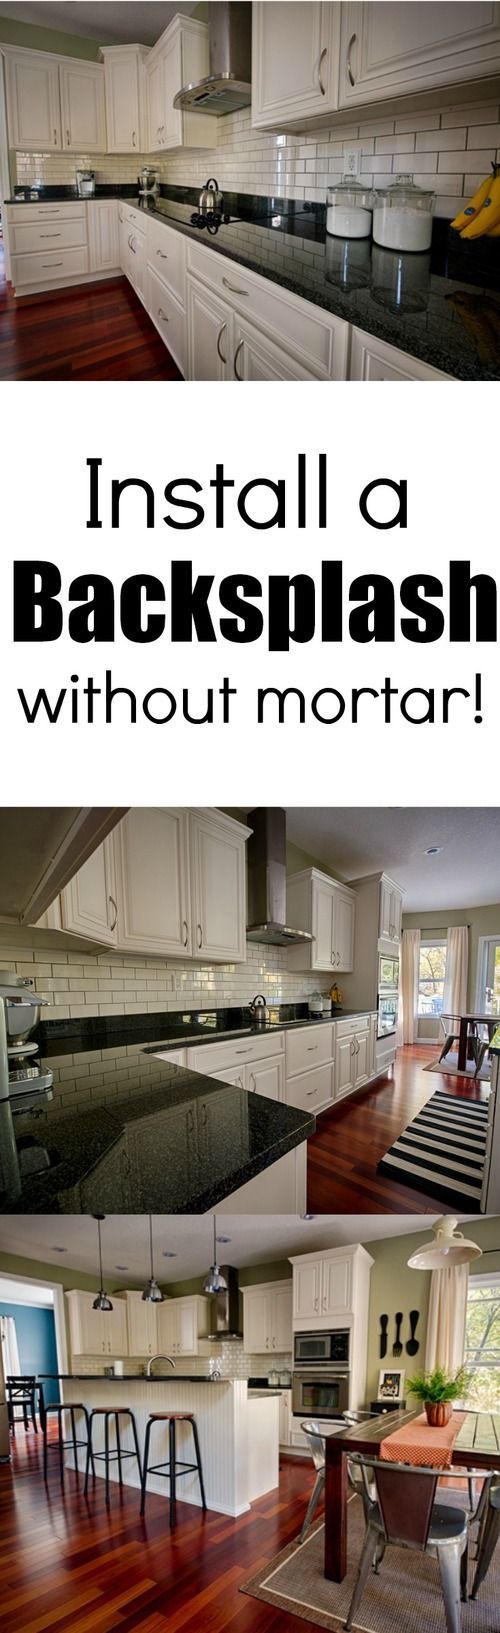 How to Install a Subway Tile Backsplash Without Mortar